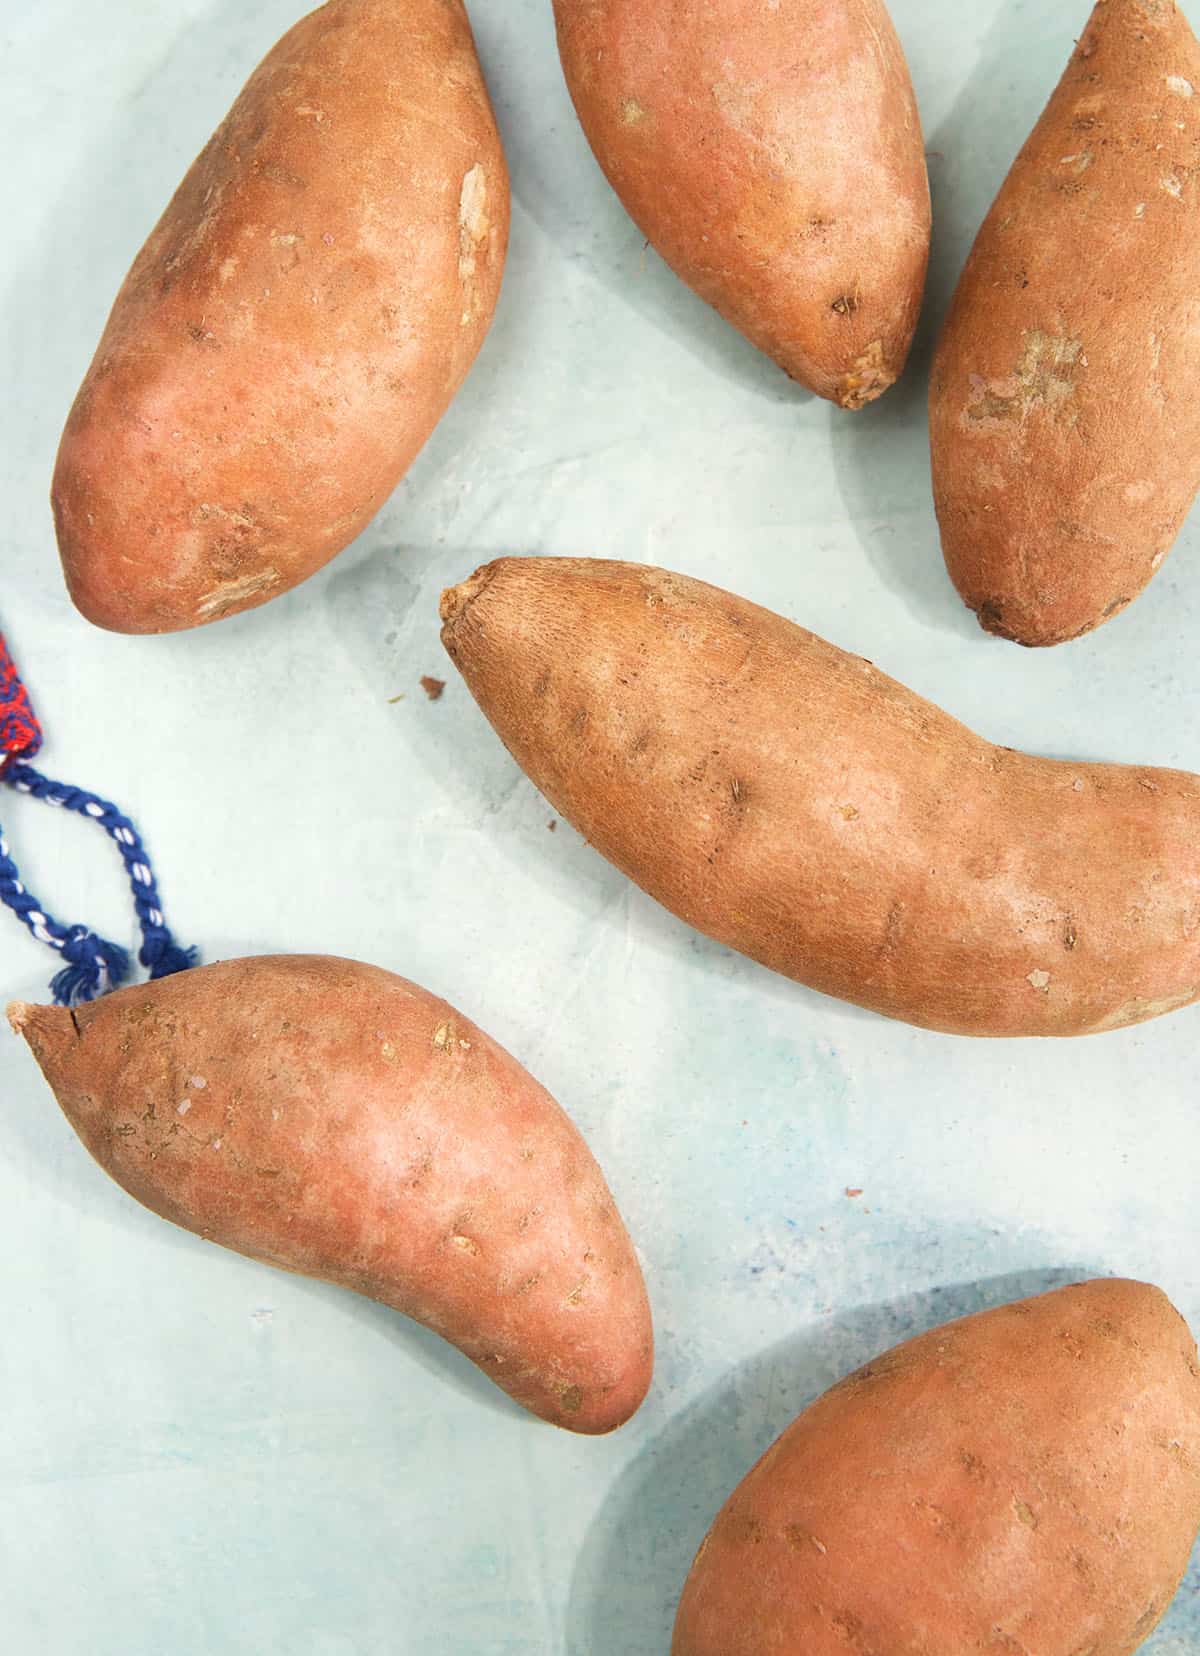 Several uncooked sweet potatoes are placed on a white surface.